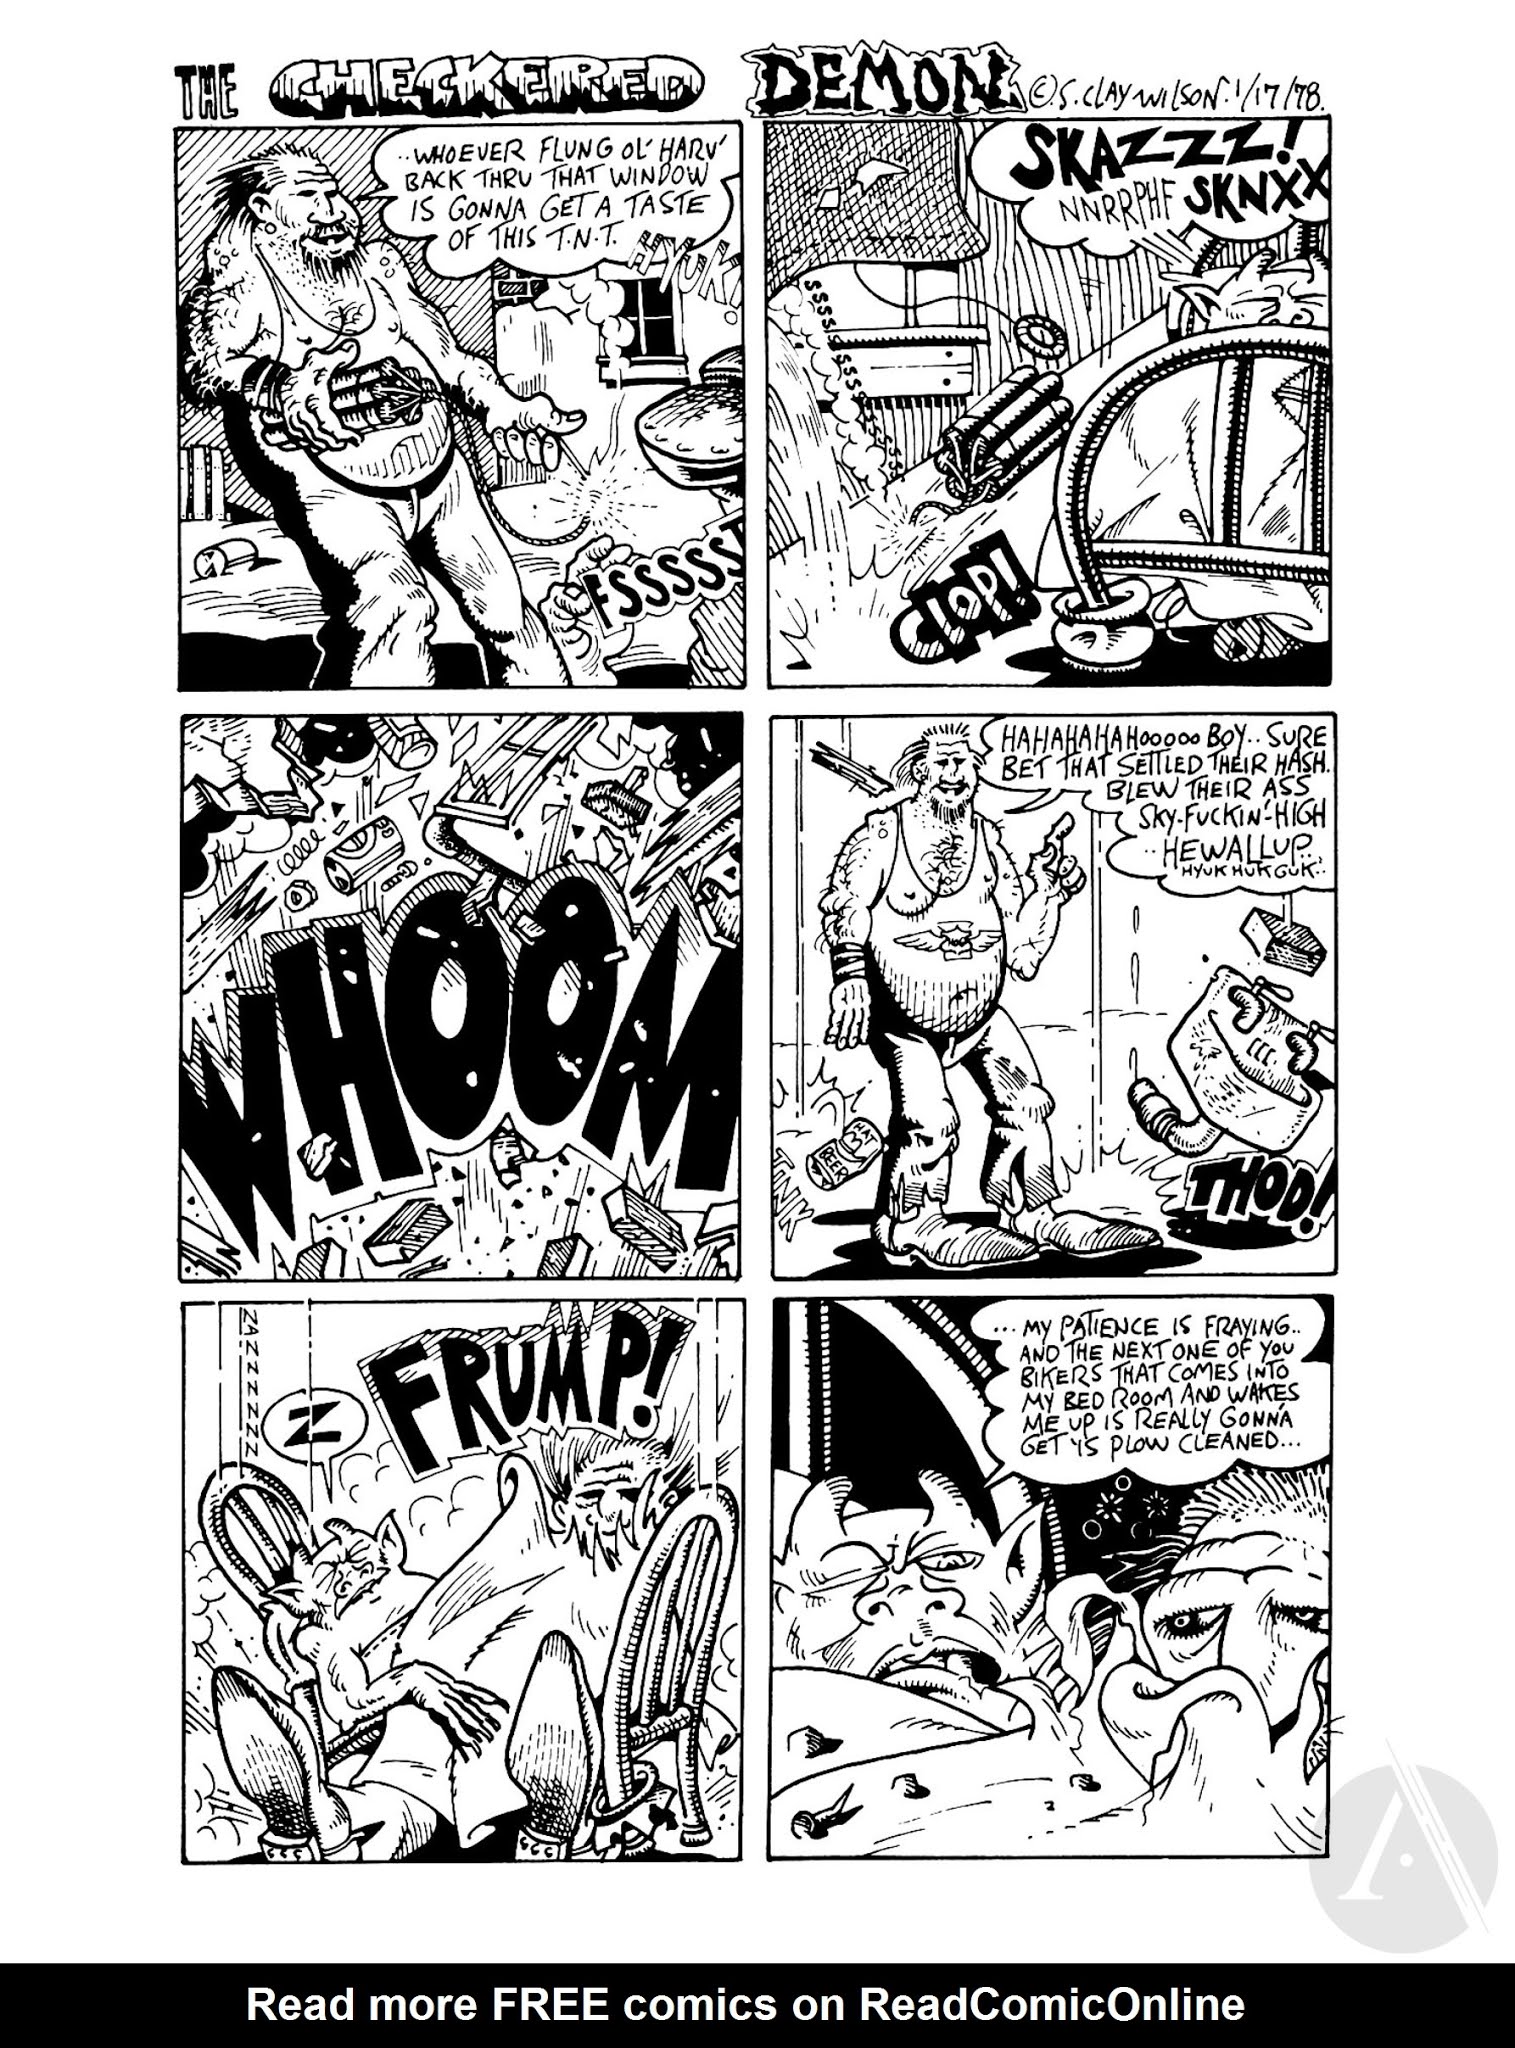 Read online The Collected Checkered Demon comic -  Issue # TPB (Part 2) - 12